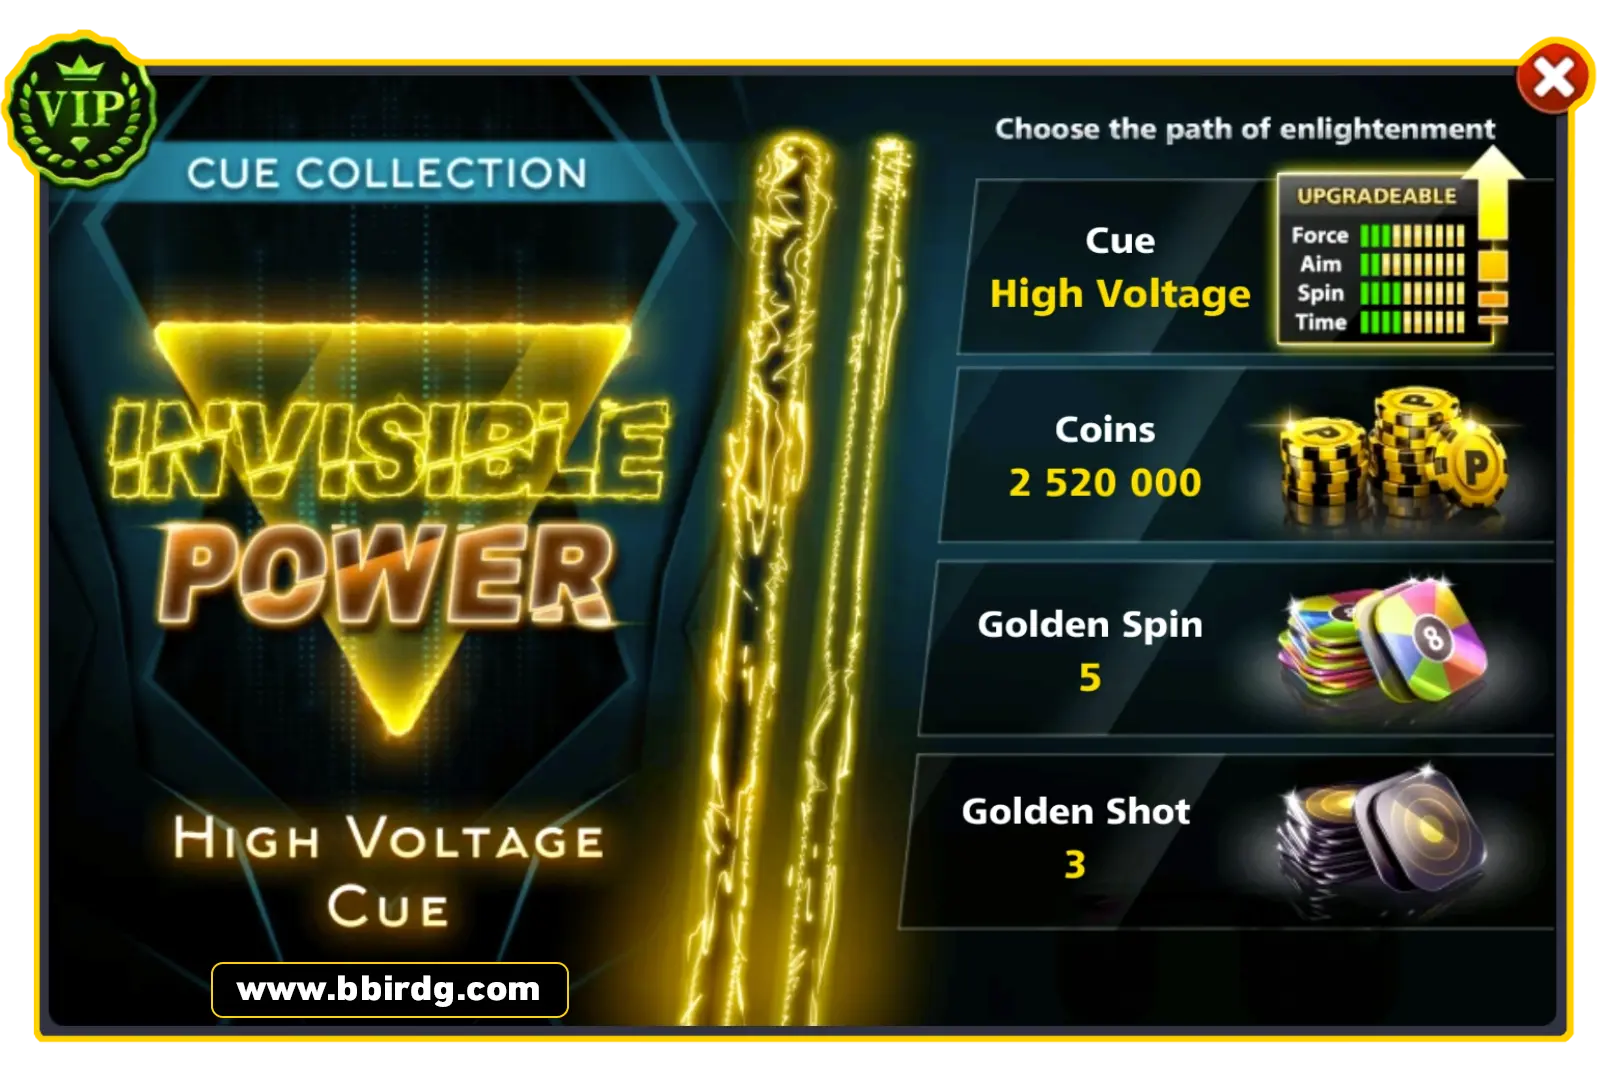 High Voltage Cue - Invisible Power | 8 Ball Pool - BlackBird Store